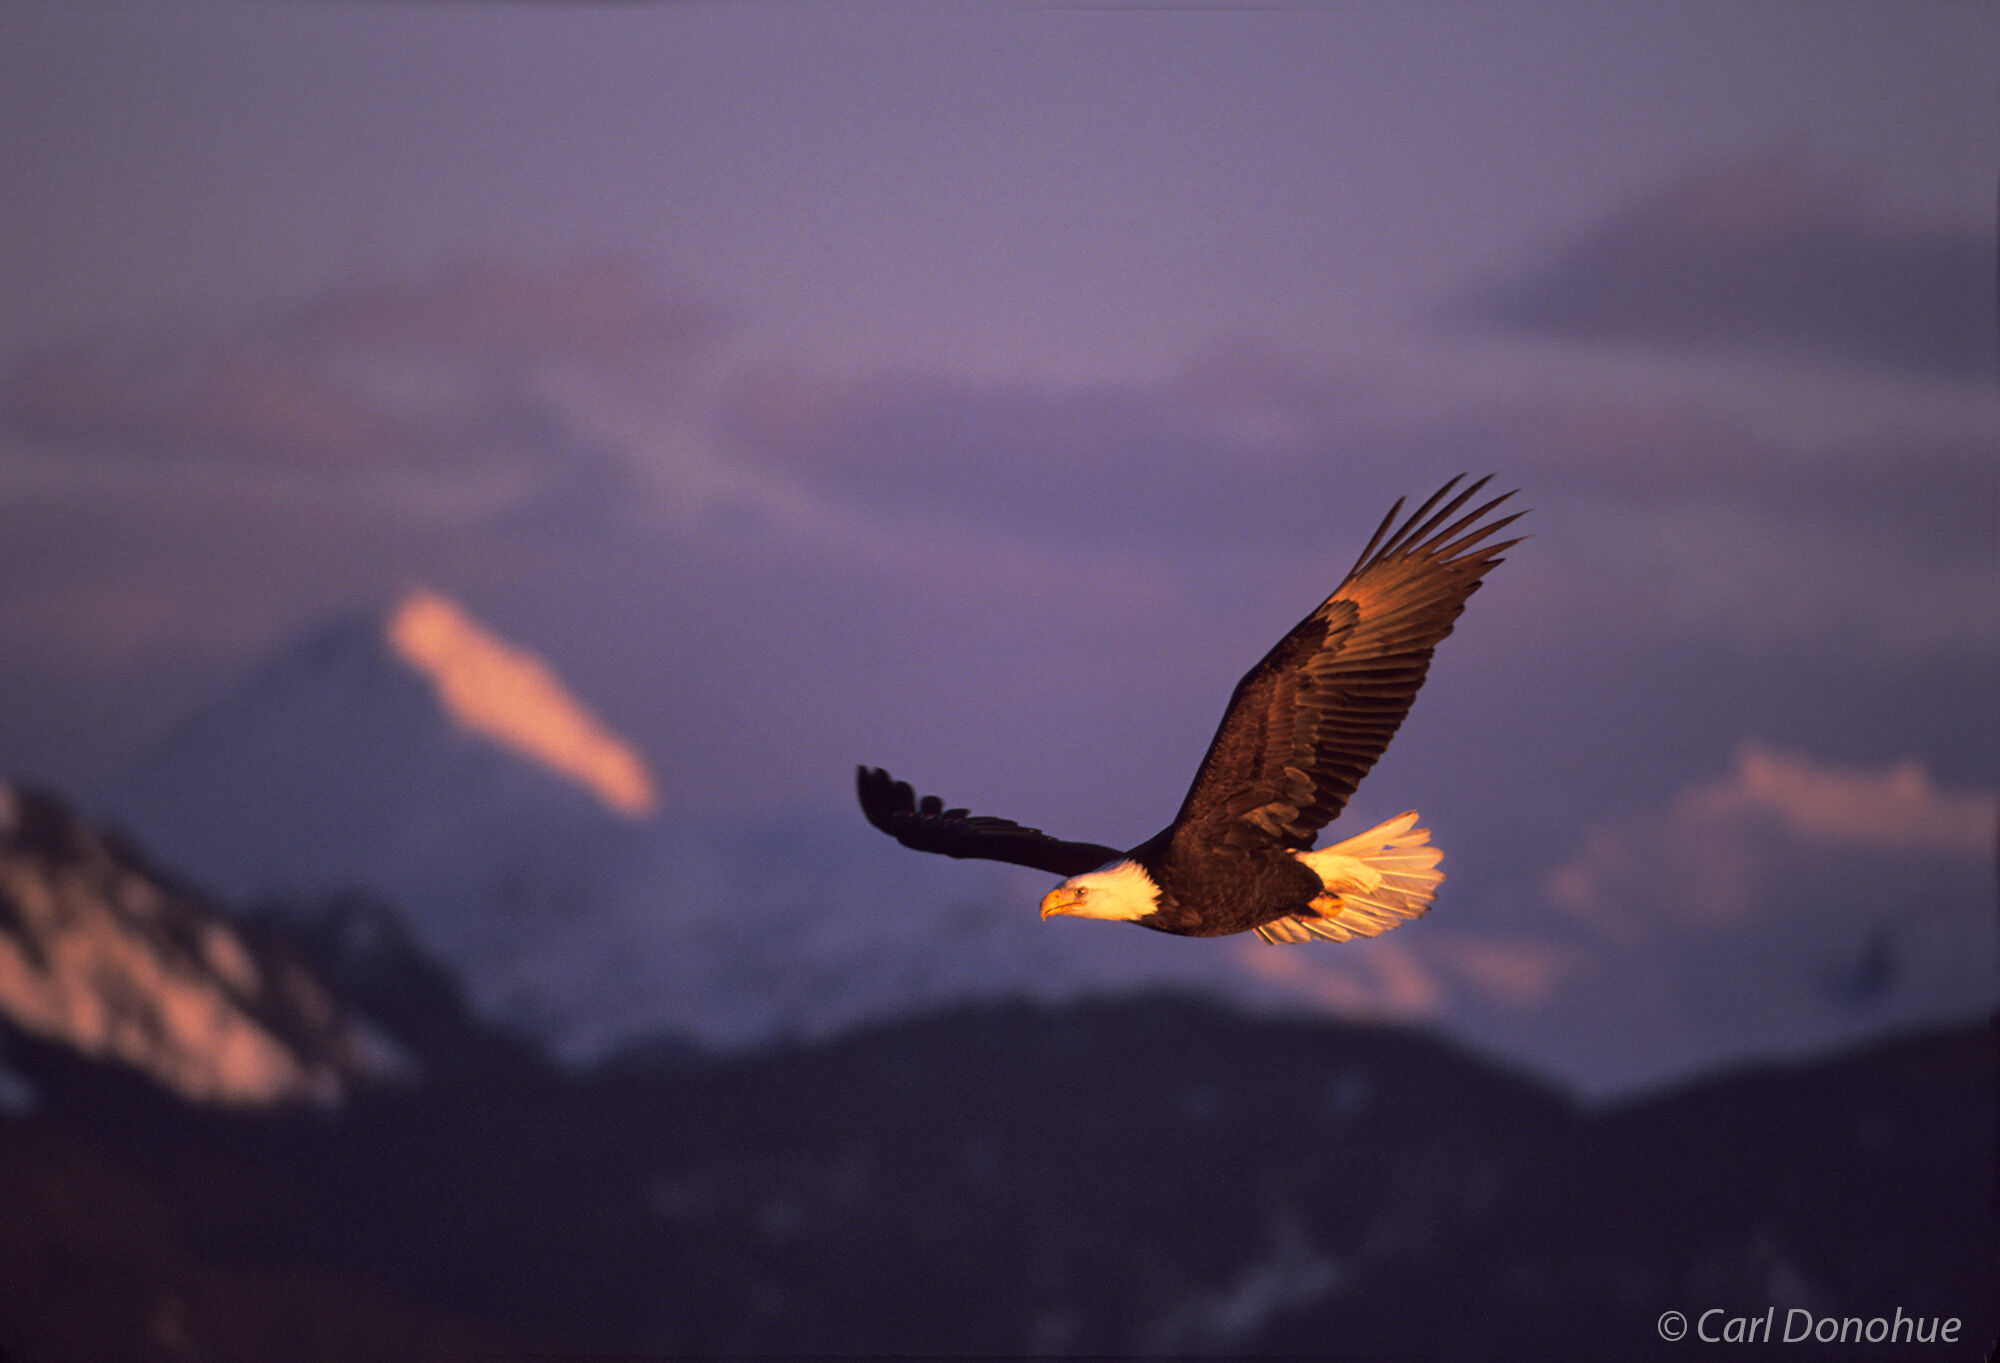 Last light of the day strikes the snow-capped mountain background and an adult bald eagle flies by near Kachemak Bay, in Homer Alaska.